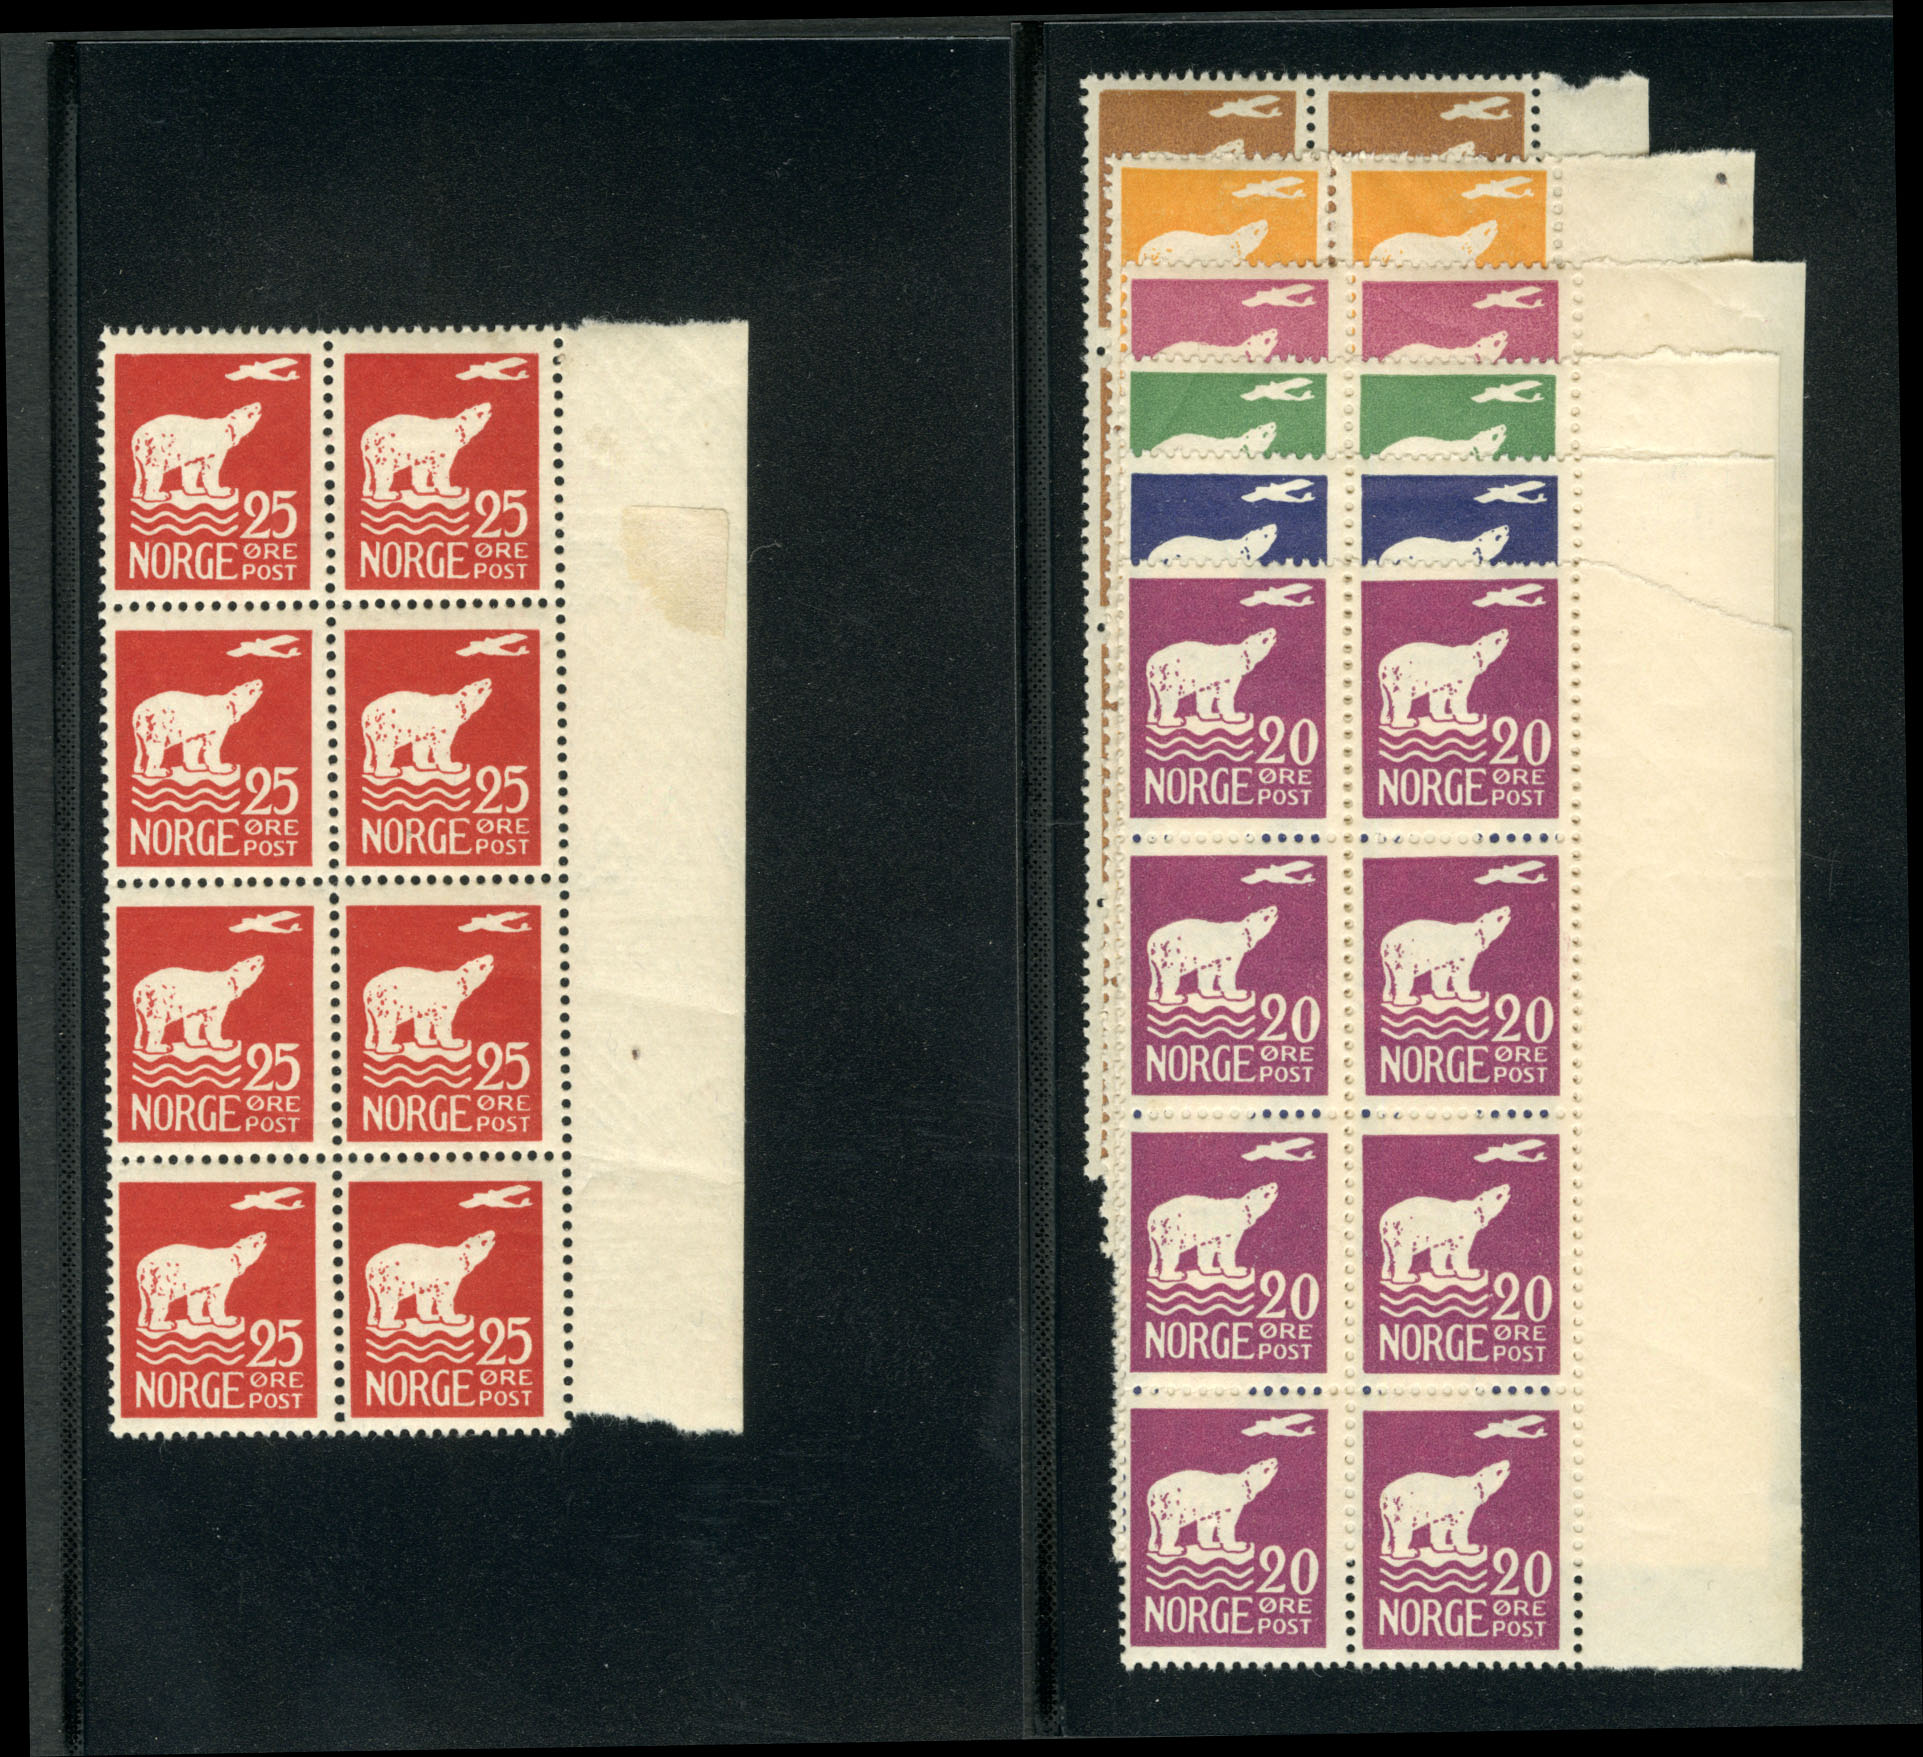 Lot 1133 - Russia  -  Cherrystone Auctions U.S. & Worldwide Stamps & Postal History